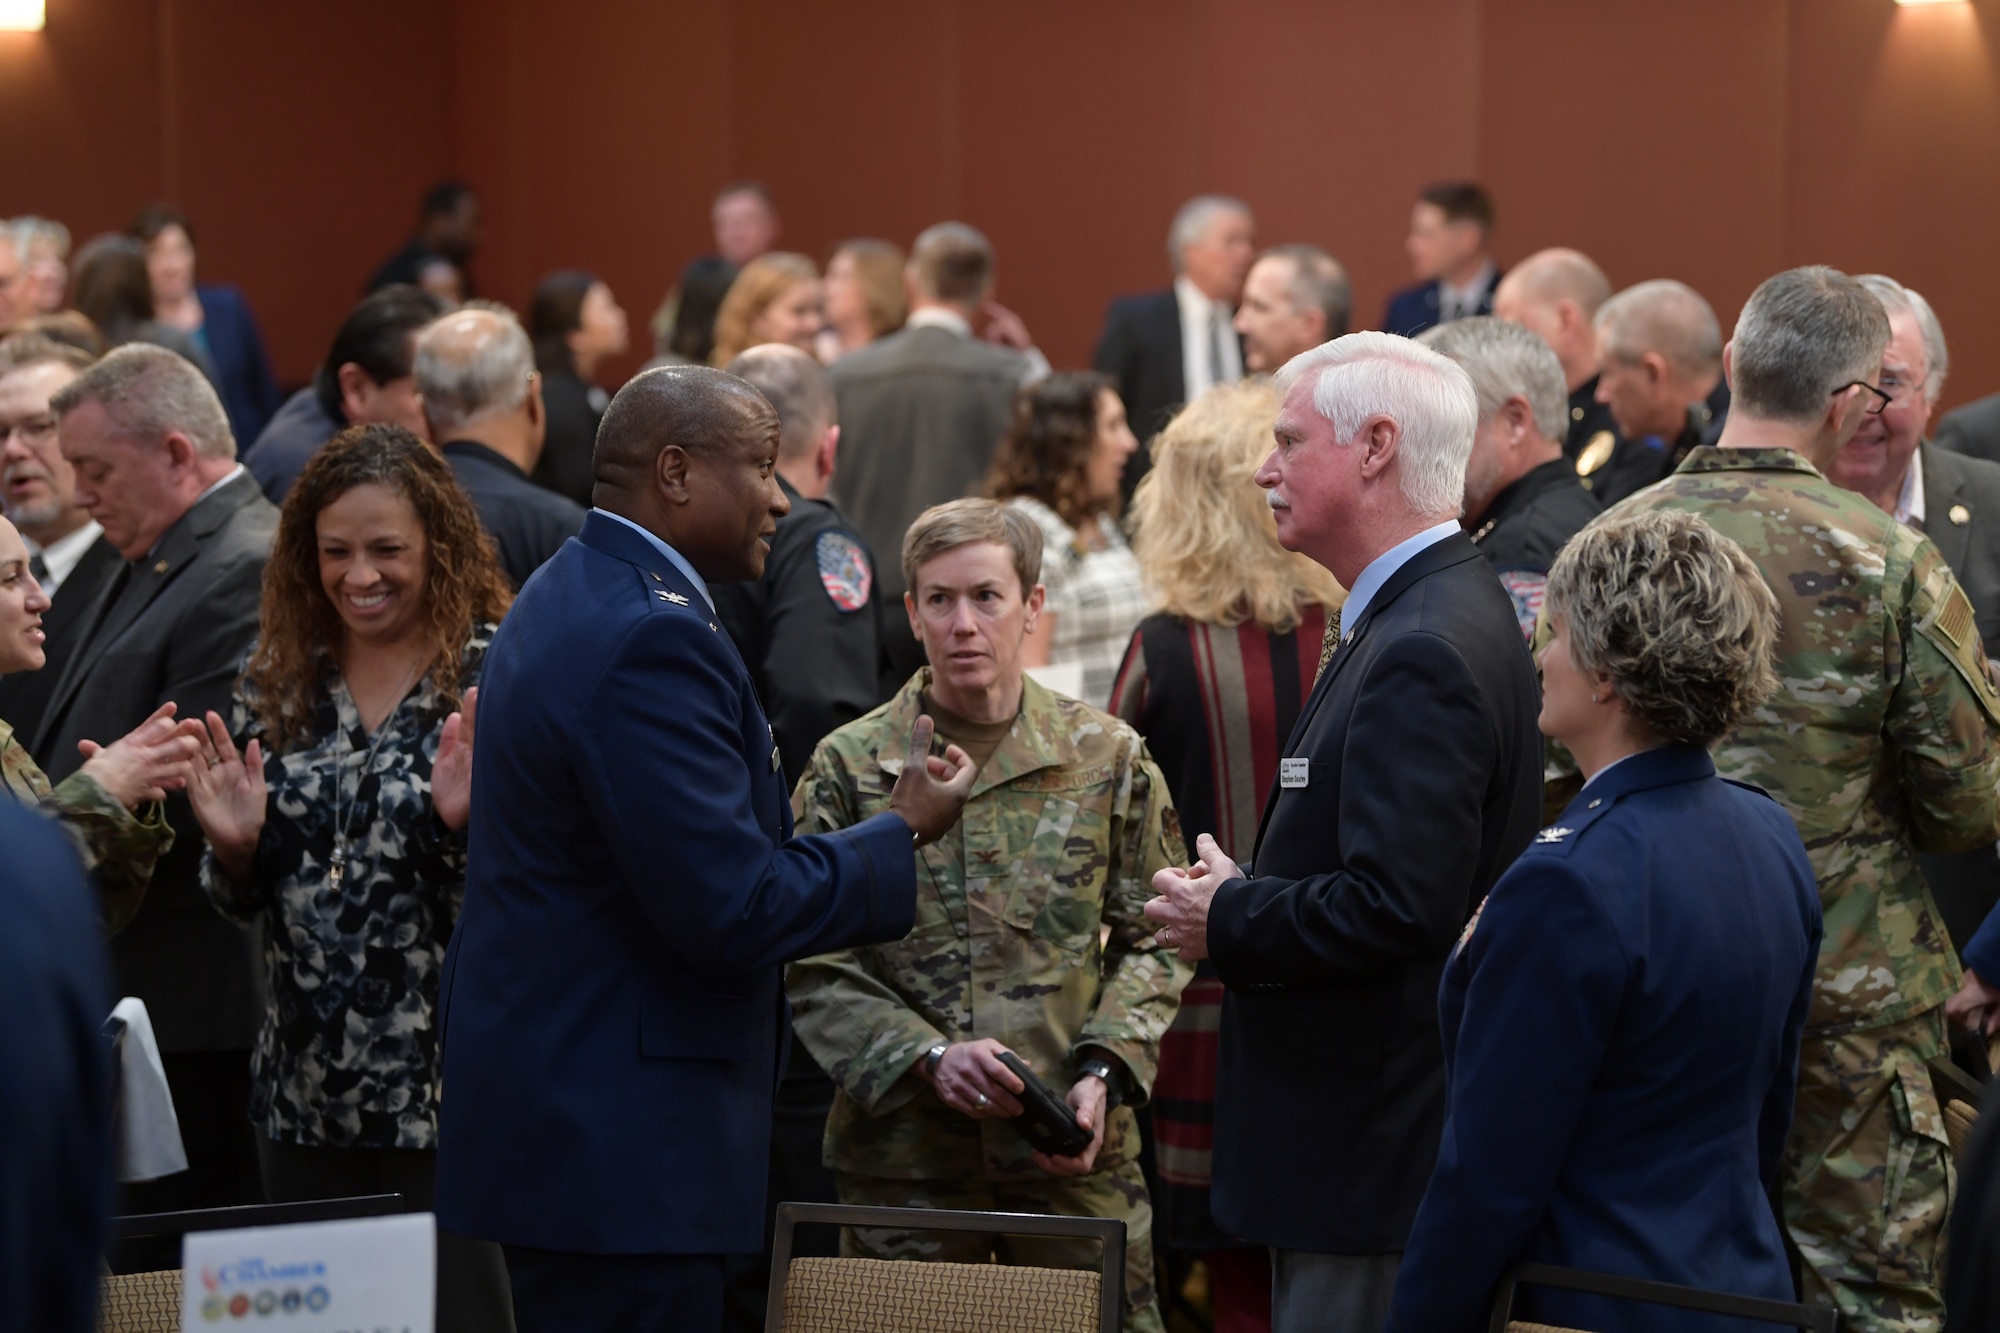 Local community and military members mingle prior to the start of the annual State of the Base luncheon at the Radisson Hotel in Aurora, Co., on Jan. 22, 2020.